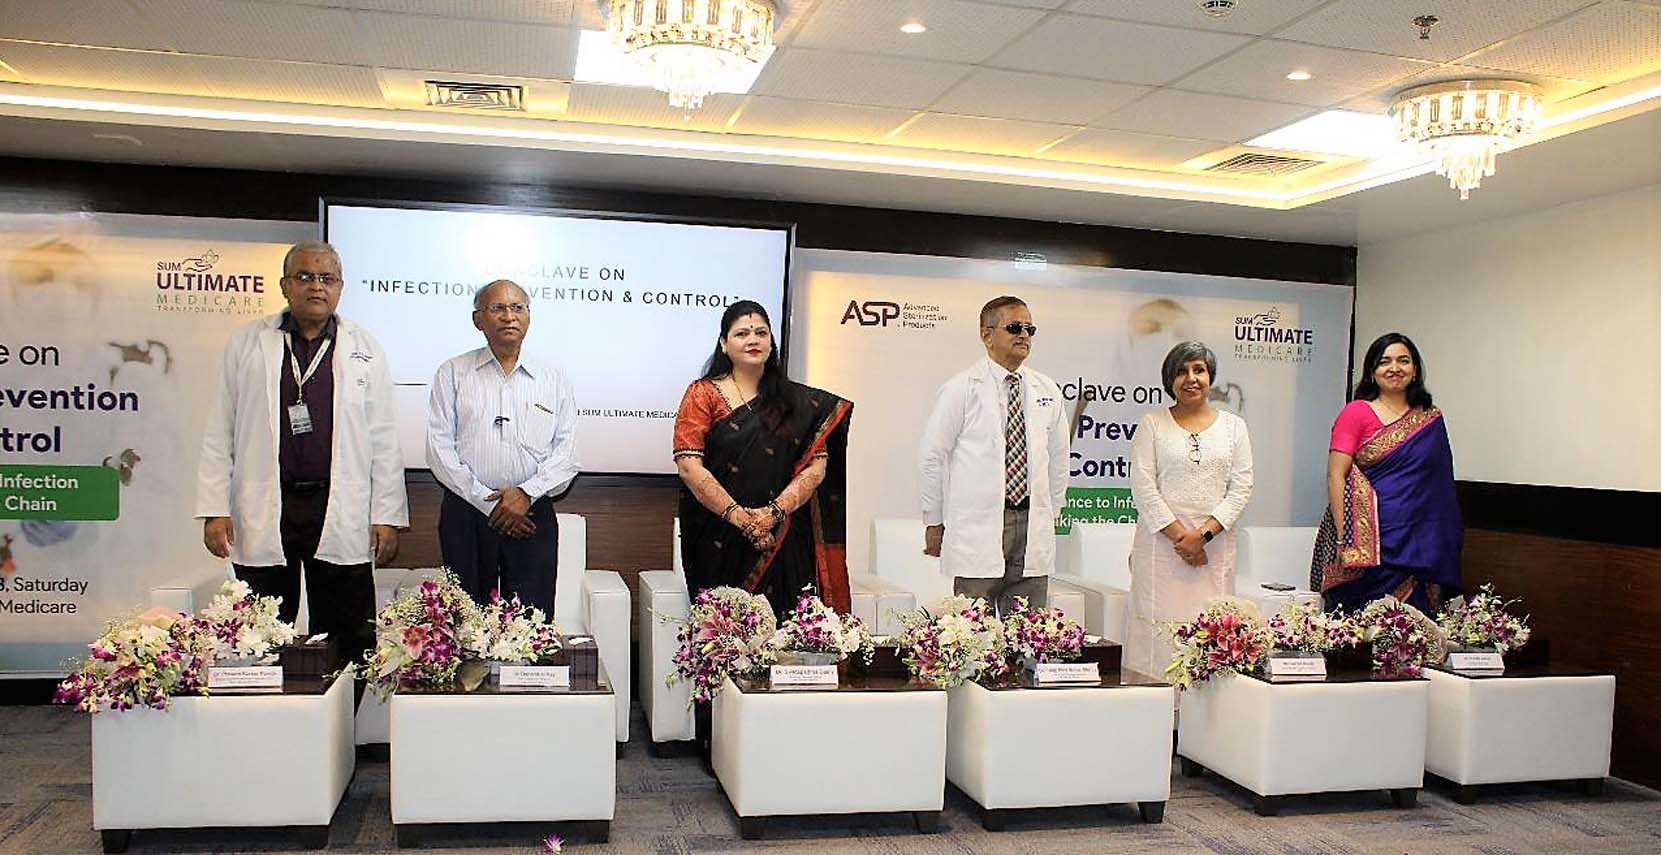 SUMUM CONDUCTS CONCLAVE ON INFECTION PREVENTION AND CONTROL